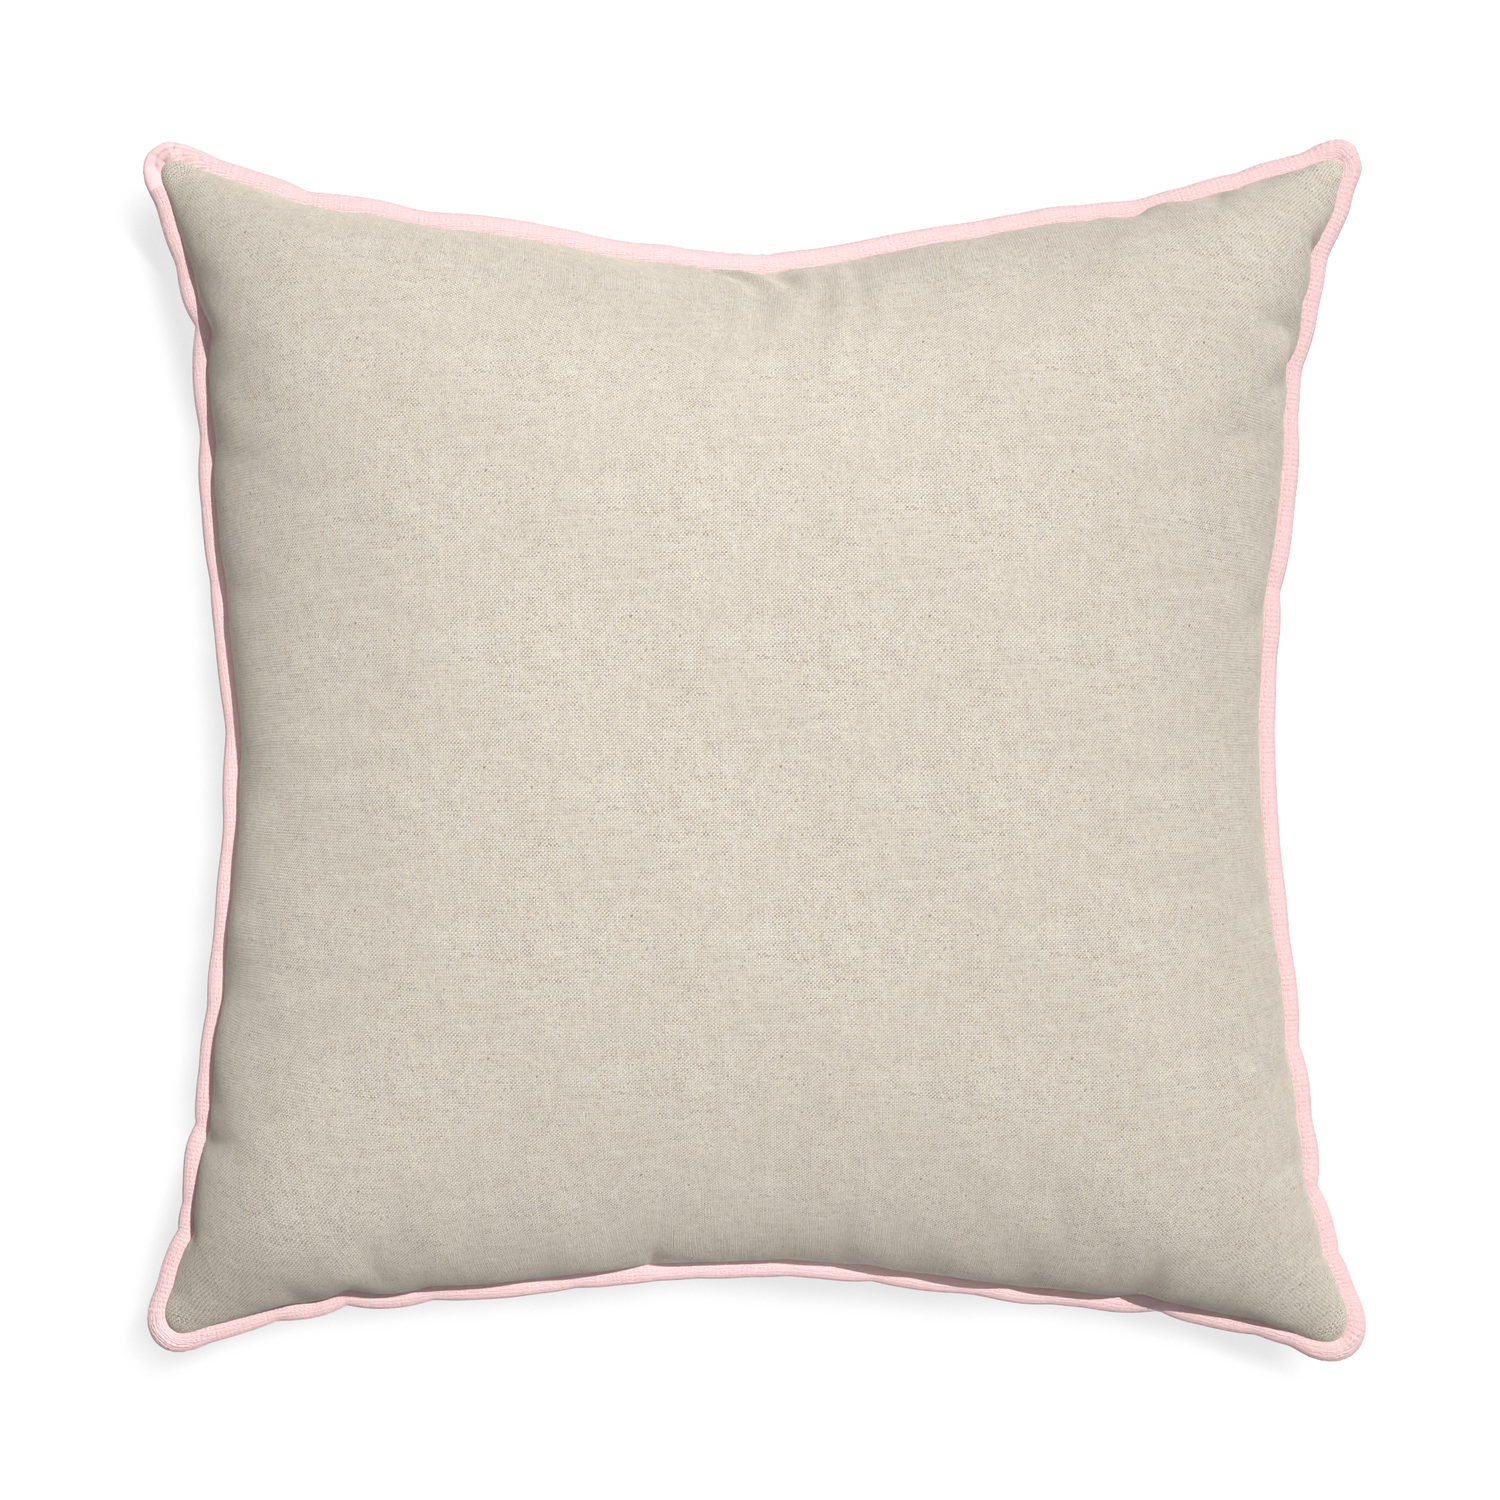 Euro-sham oat custom pillow with petal piping on white background